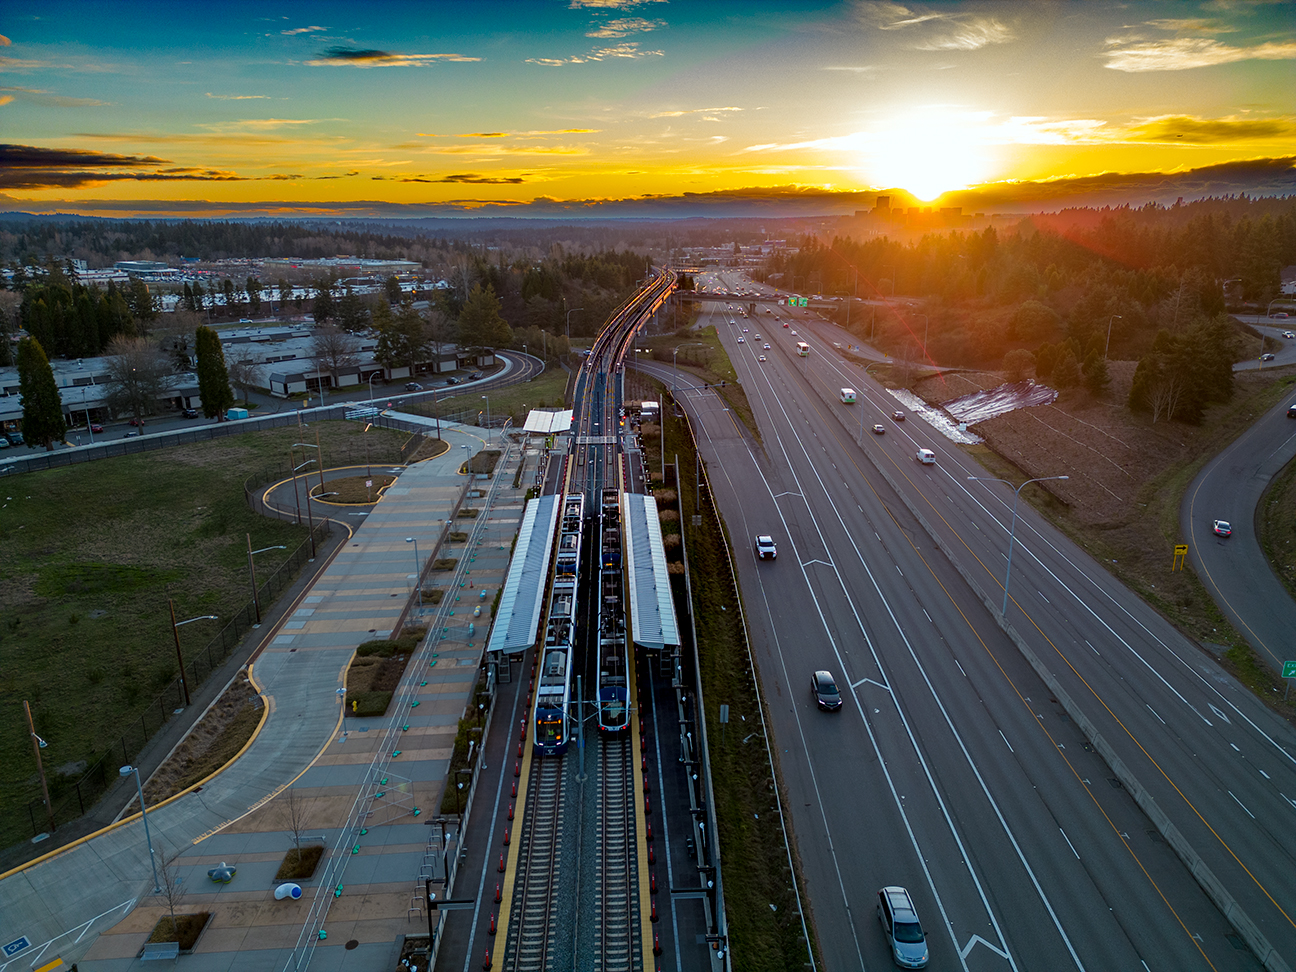 Sunset during simulated service on East Link / Line 2